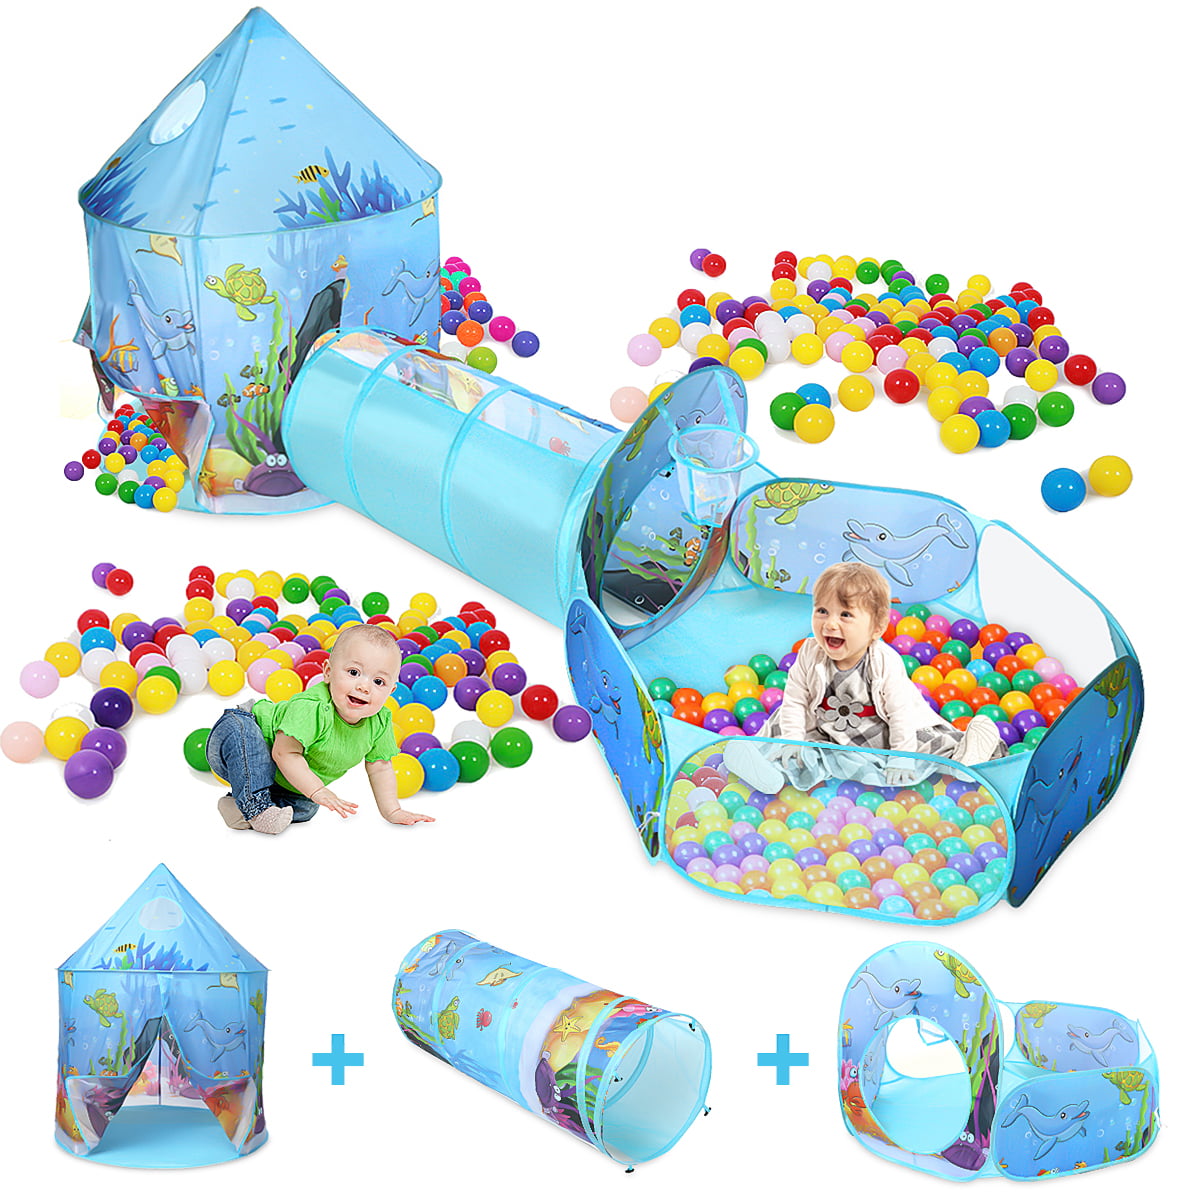 3 in 1 Portable Kids Play Tent Crawl Tunnel Ball Pit Tent Set Indoor Outdoor 